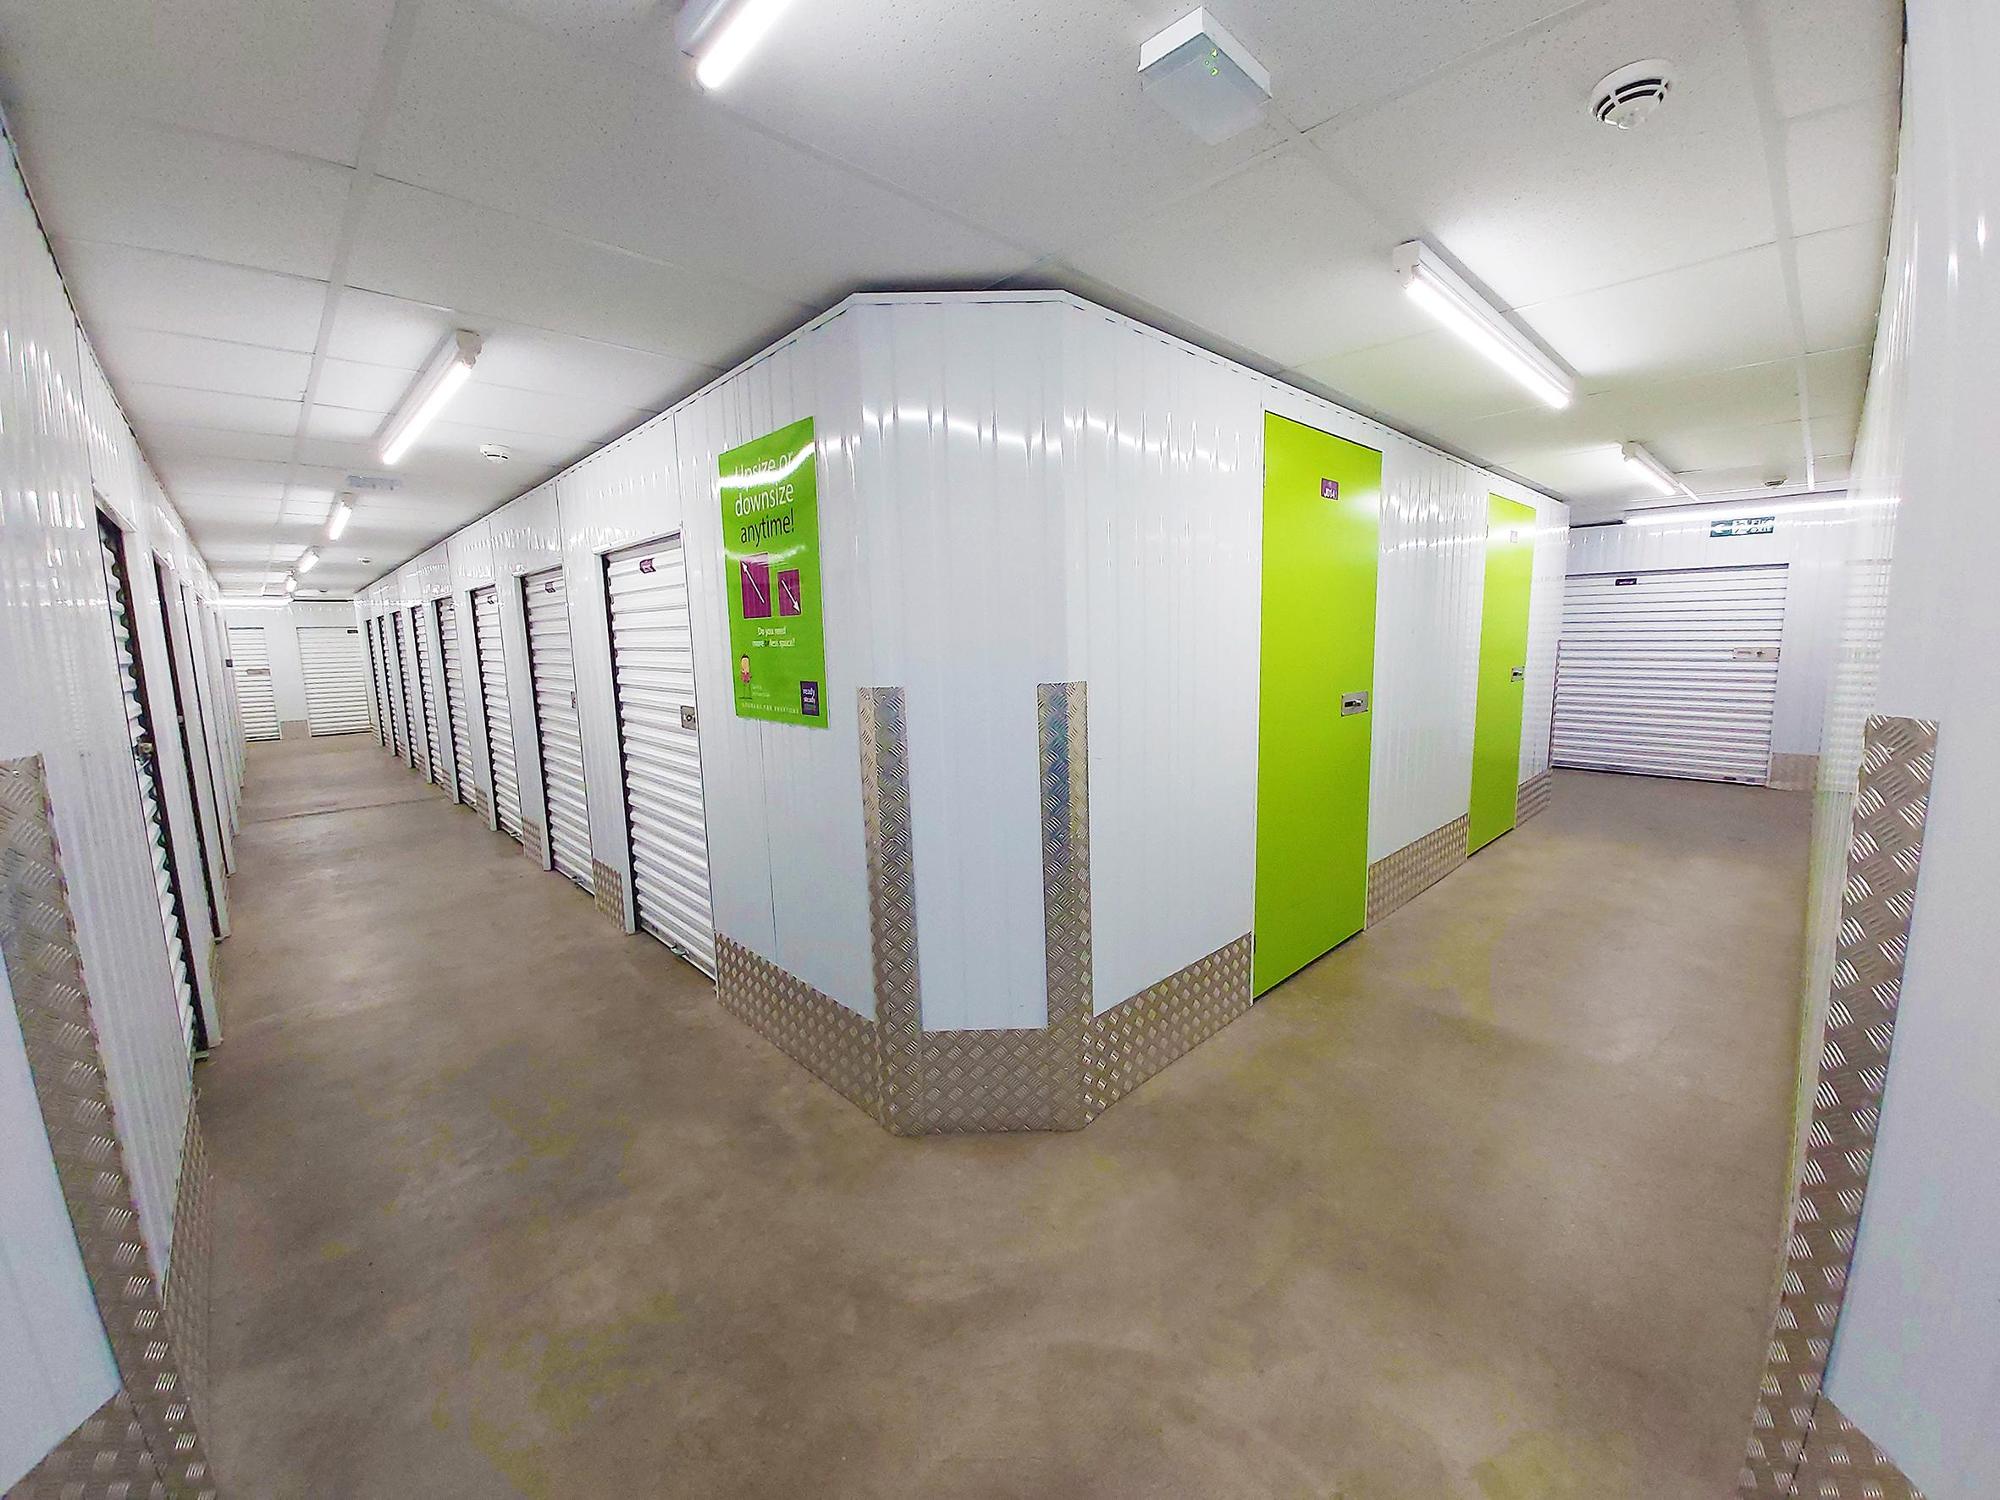 Images Ready Steady Store Self Storage Bournemouth